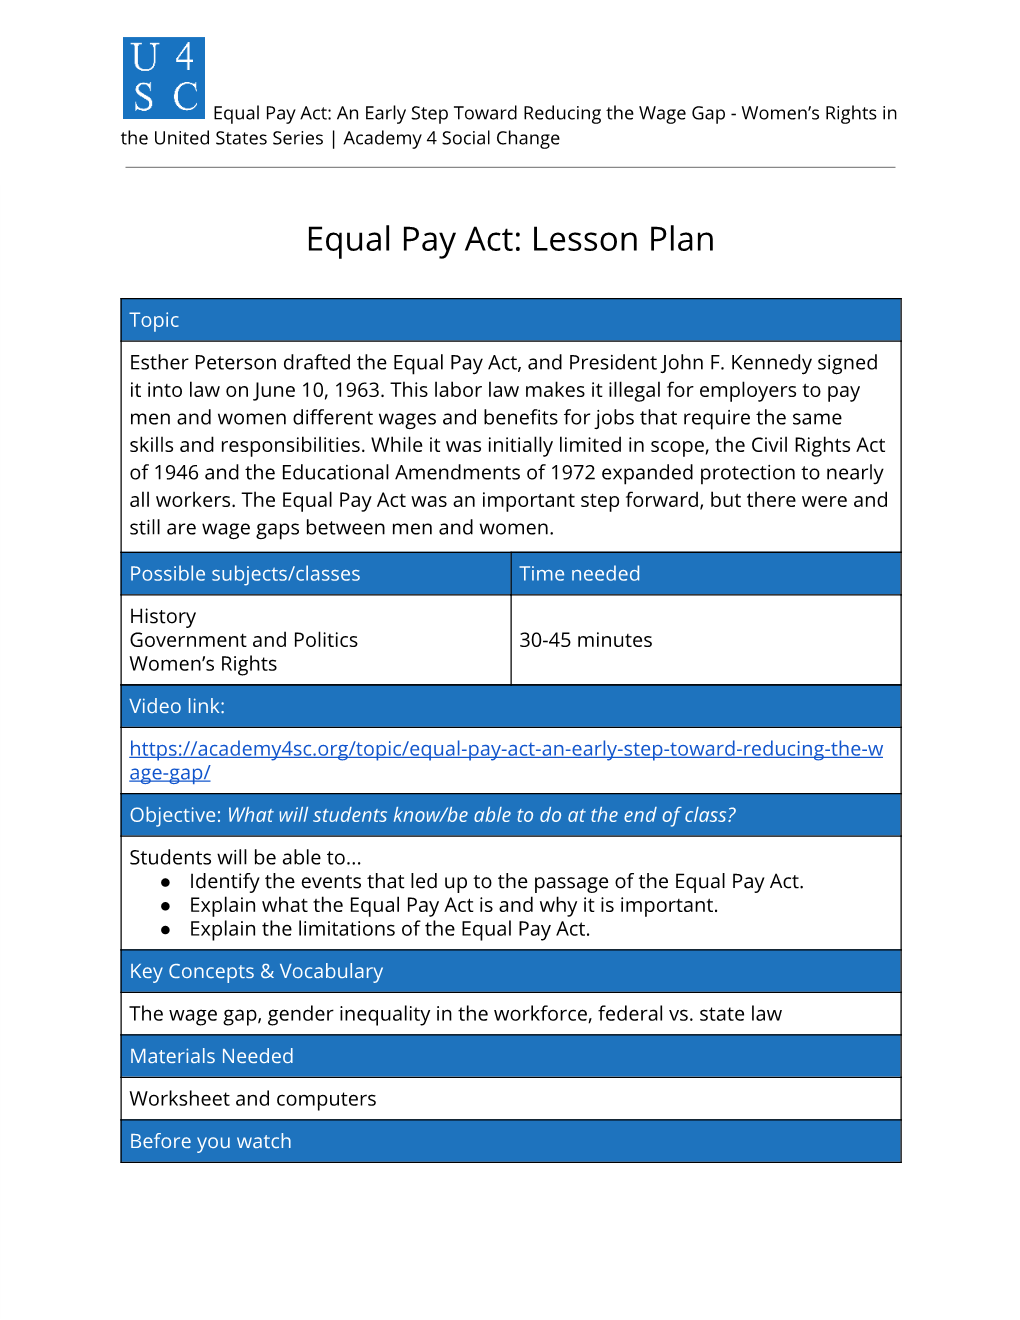 Equal Pay Act: Lesson Plan